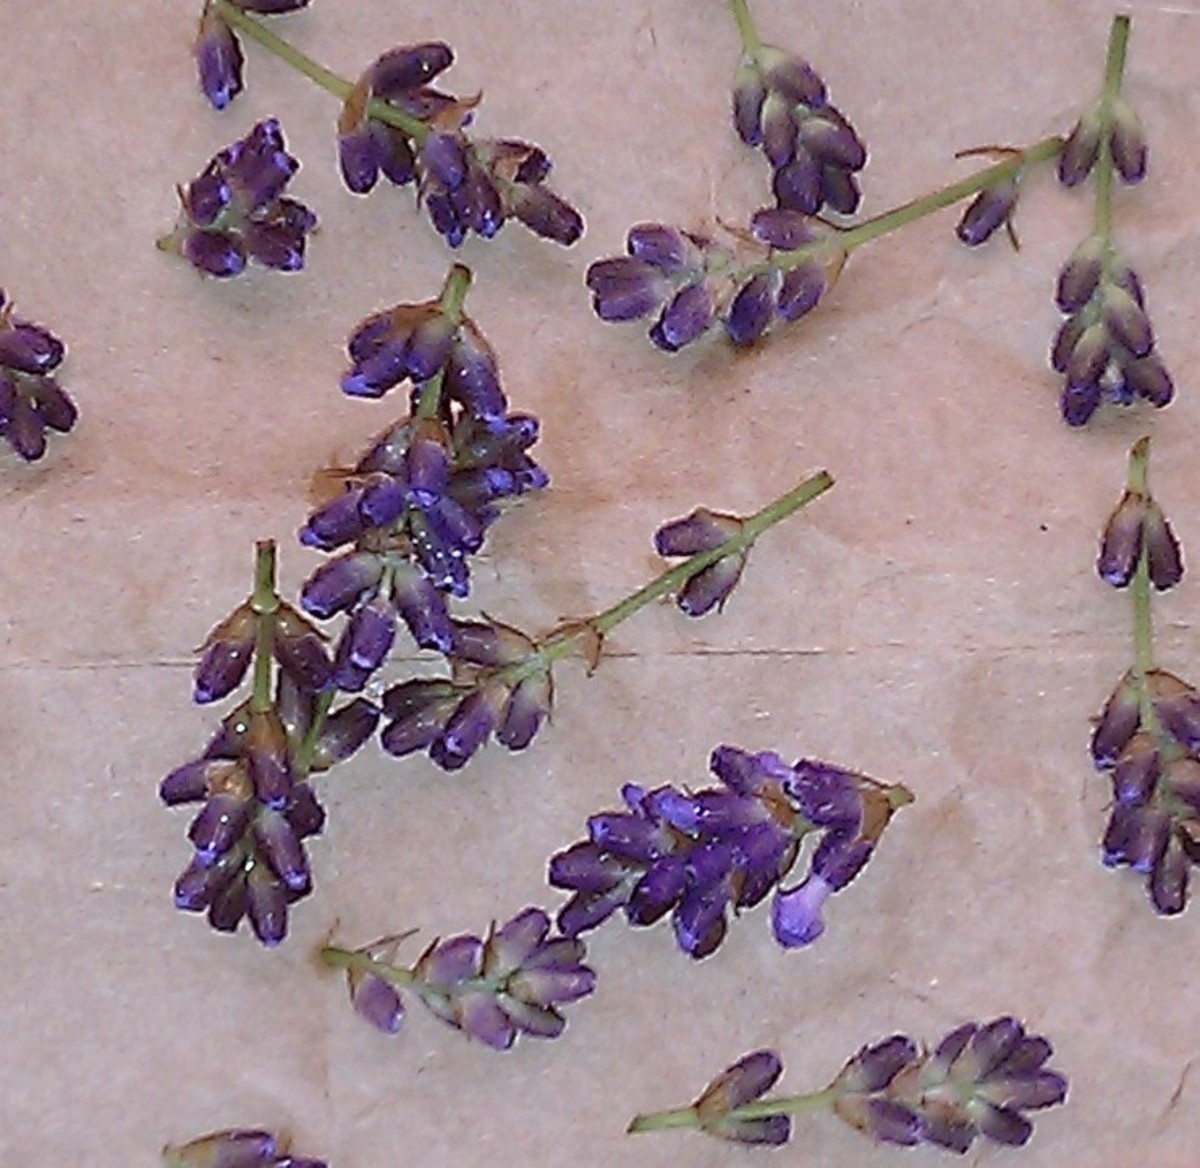 Drying, home-harvested lavender